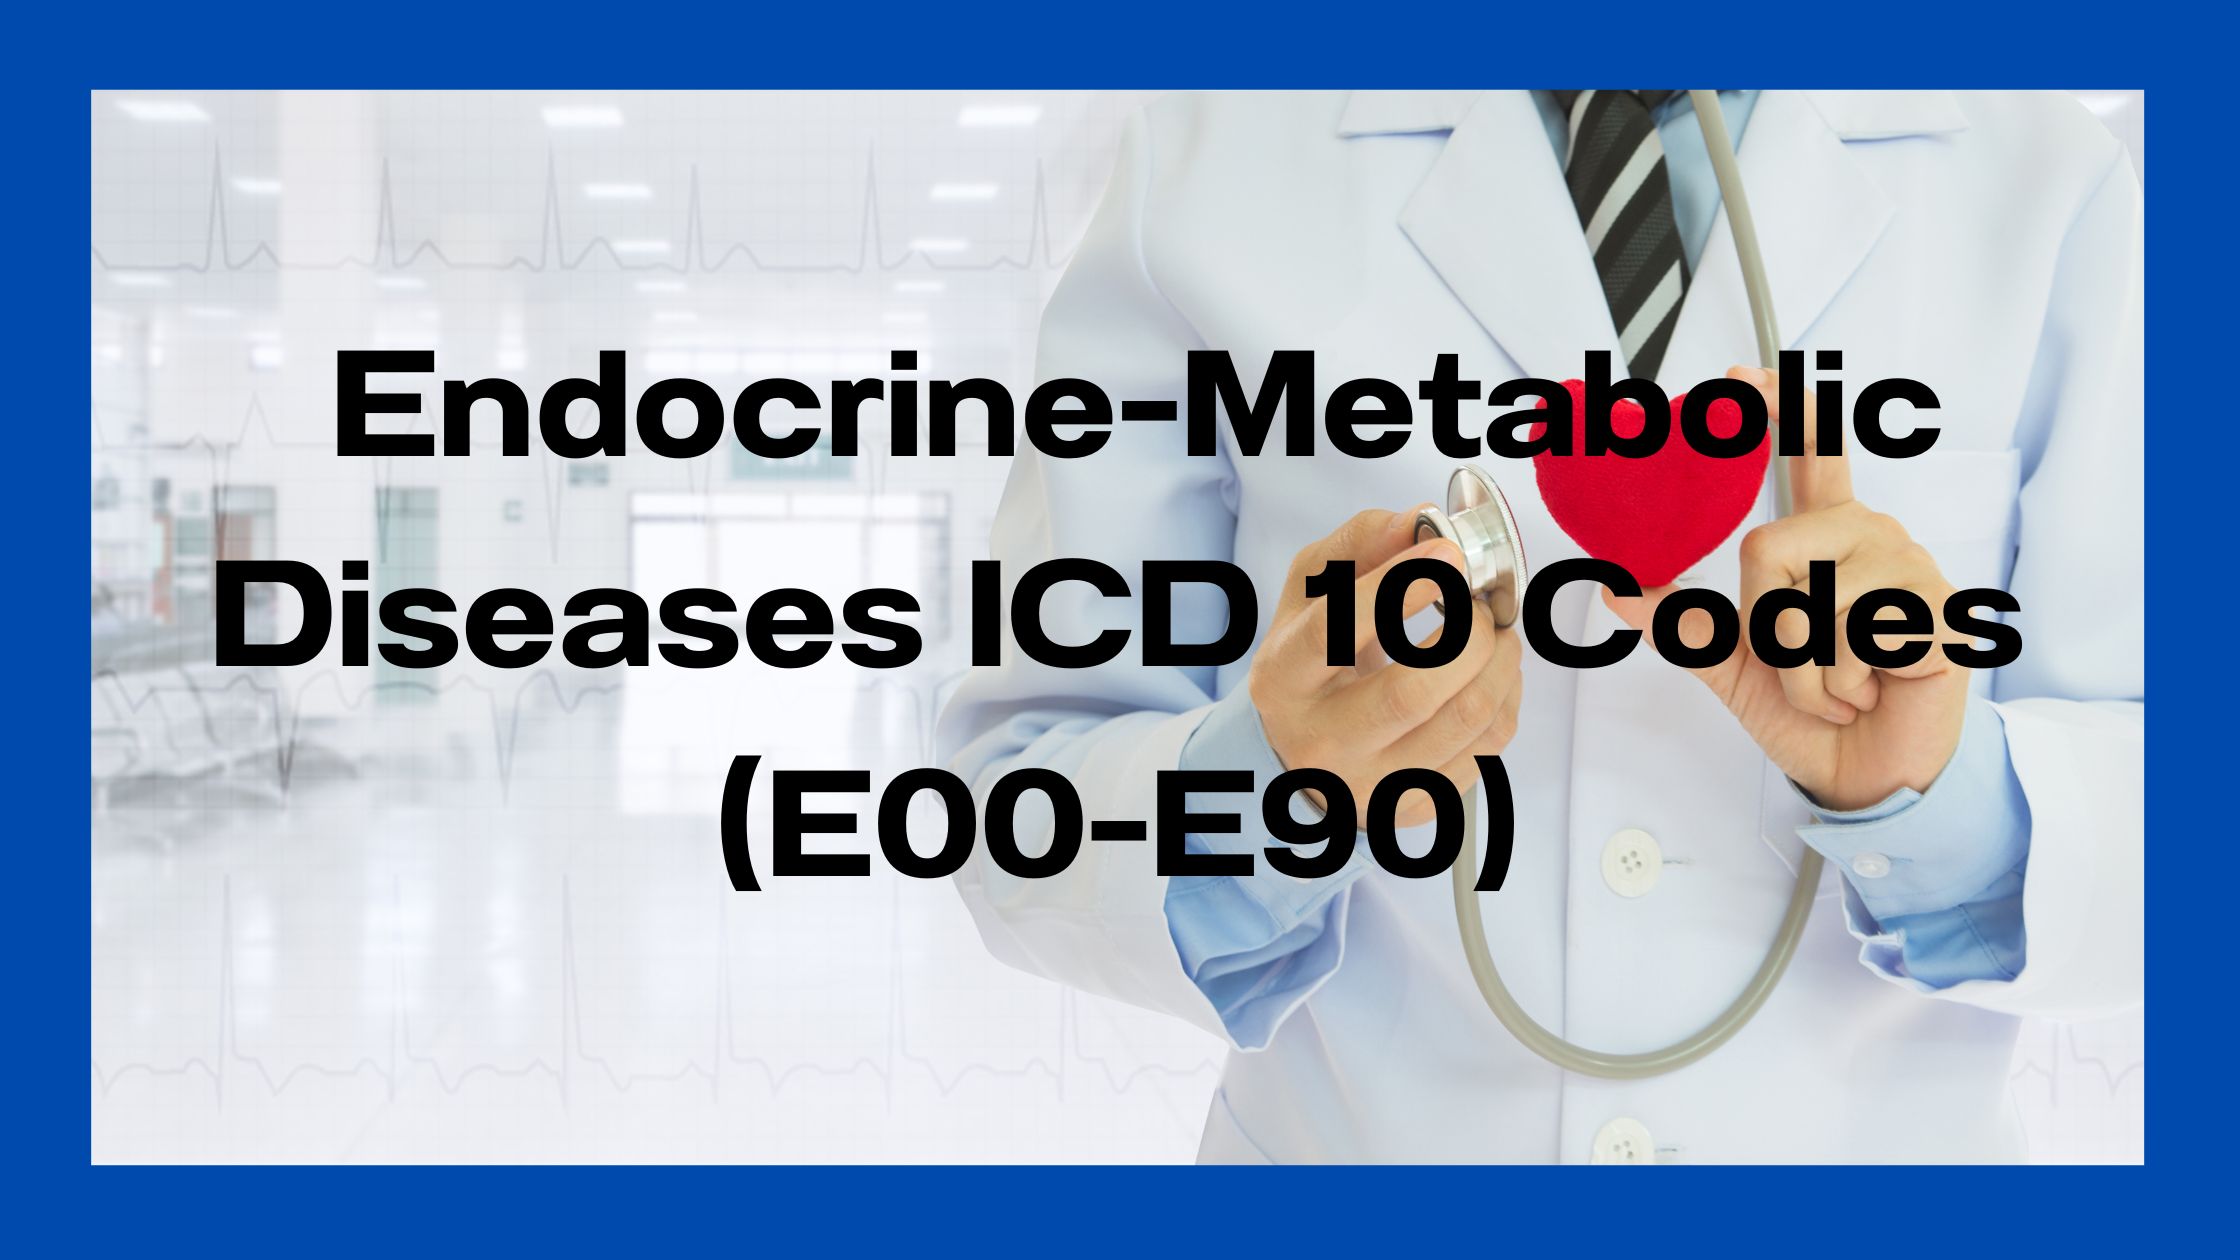 Endocrine, nutritional and metabolic diseases icd 10 codes E00-E89